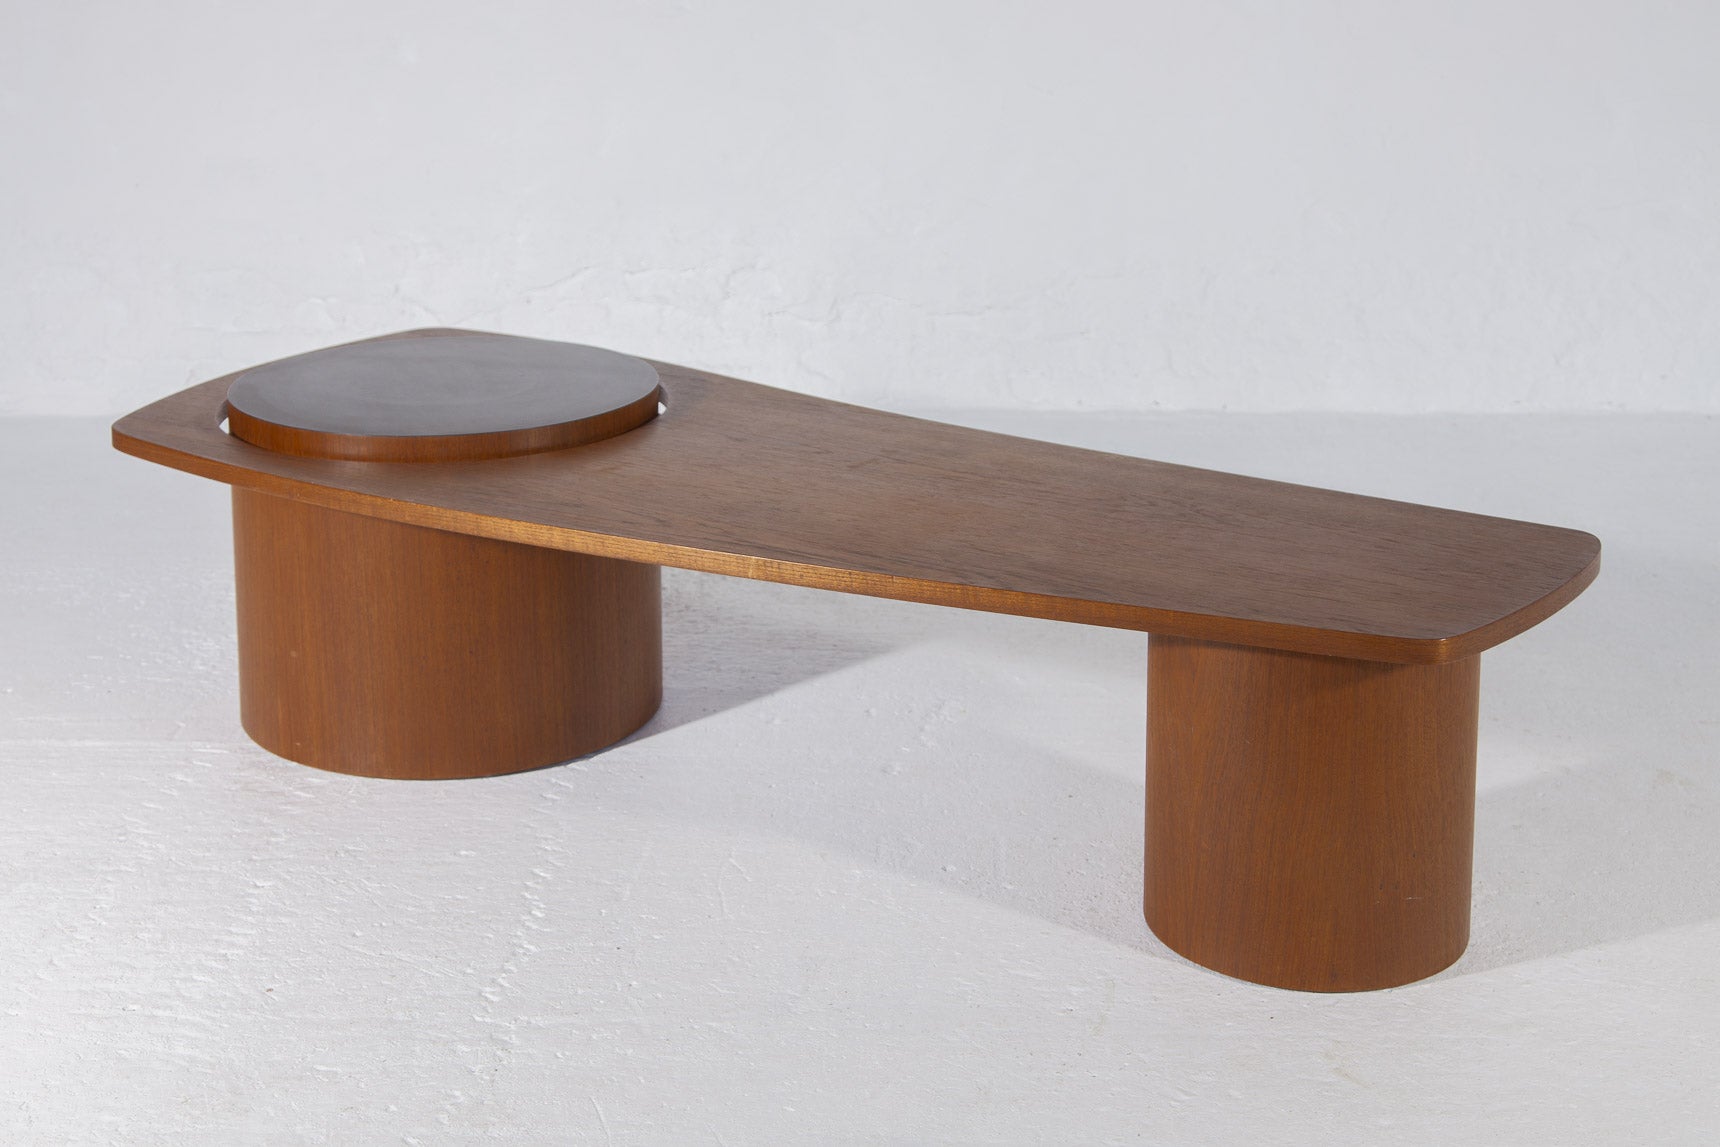 Danish organisch kidney shaped teak coffee table 1960s. Very stylish mid-century modern coffee table with a round core point black lacquered gives a nice accent to the kidney-shaped design floating top. Denmark Furniture.
Good original condition,